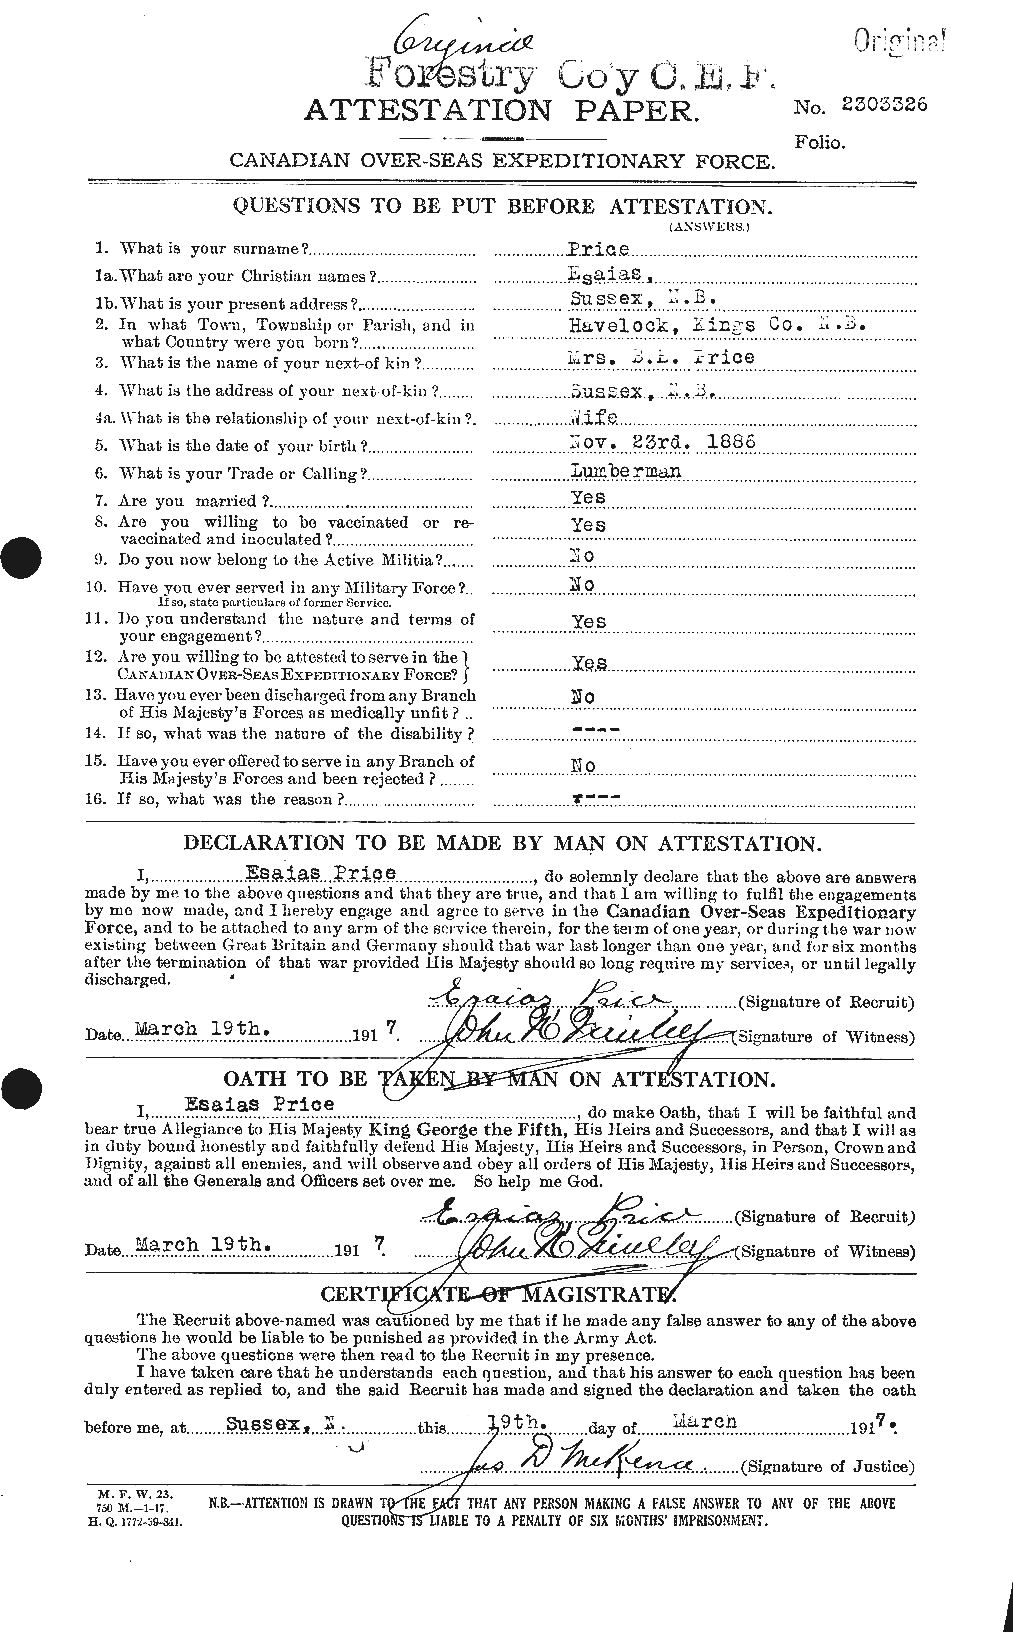 Personnel Records of the First World War - CEF 587042a